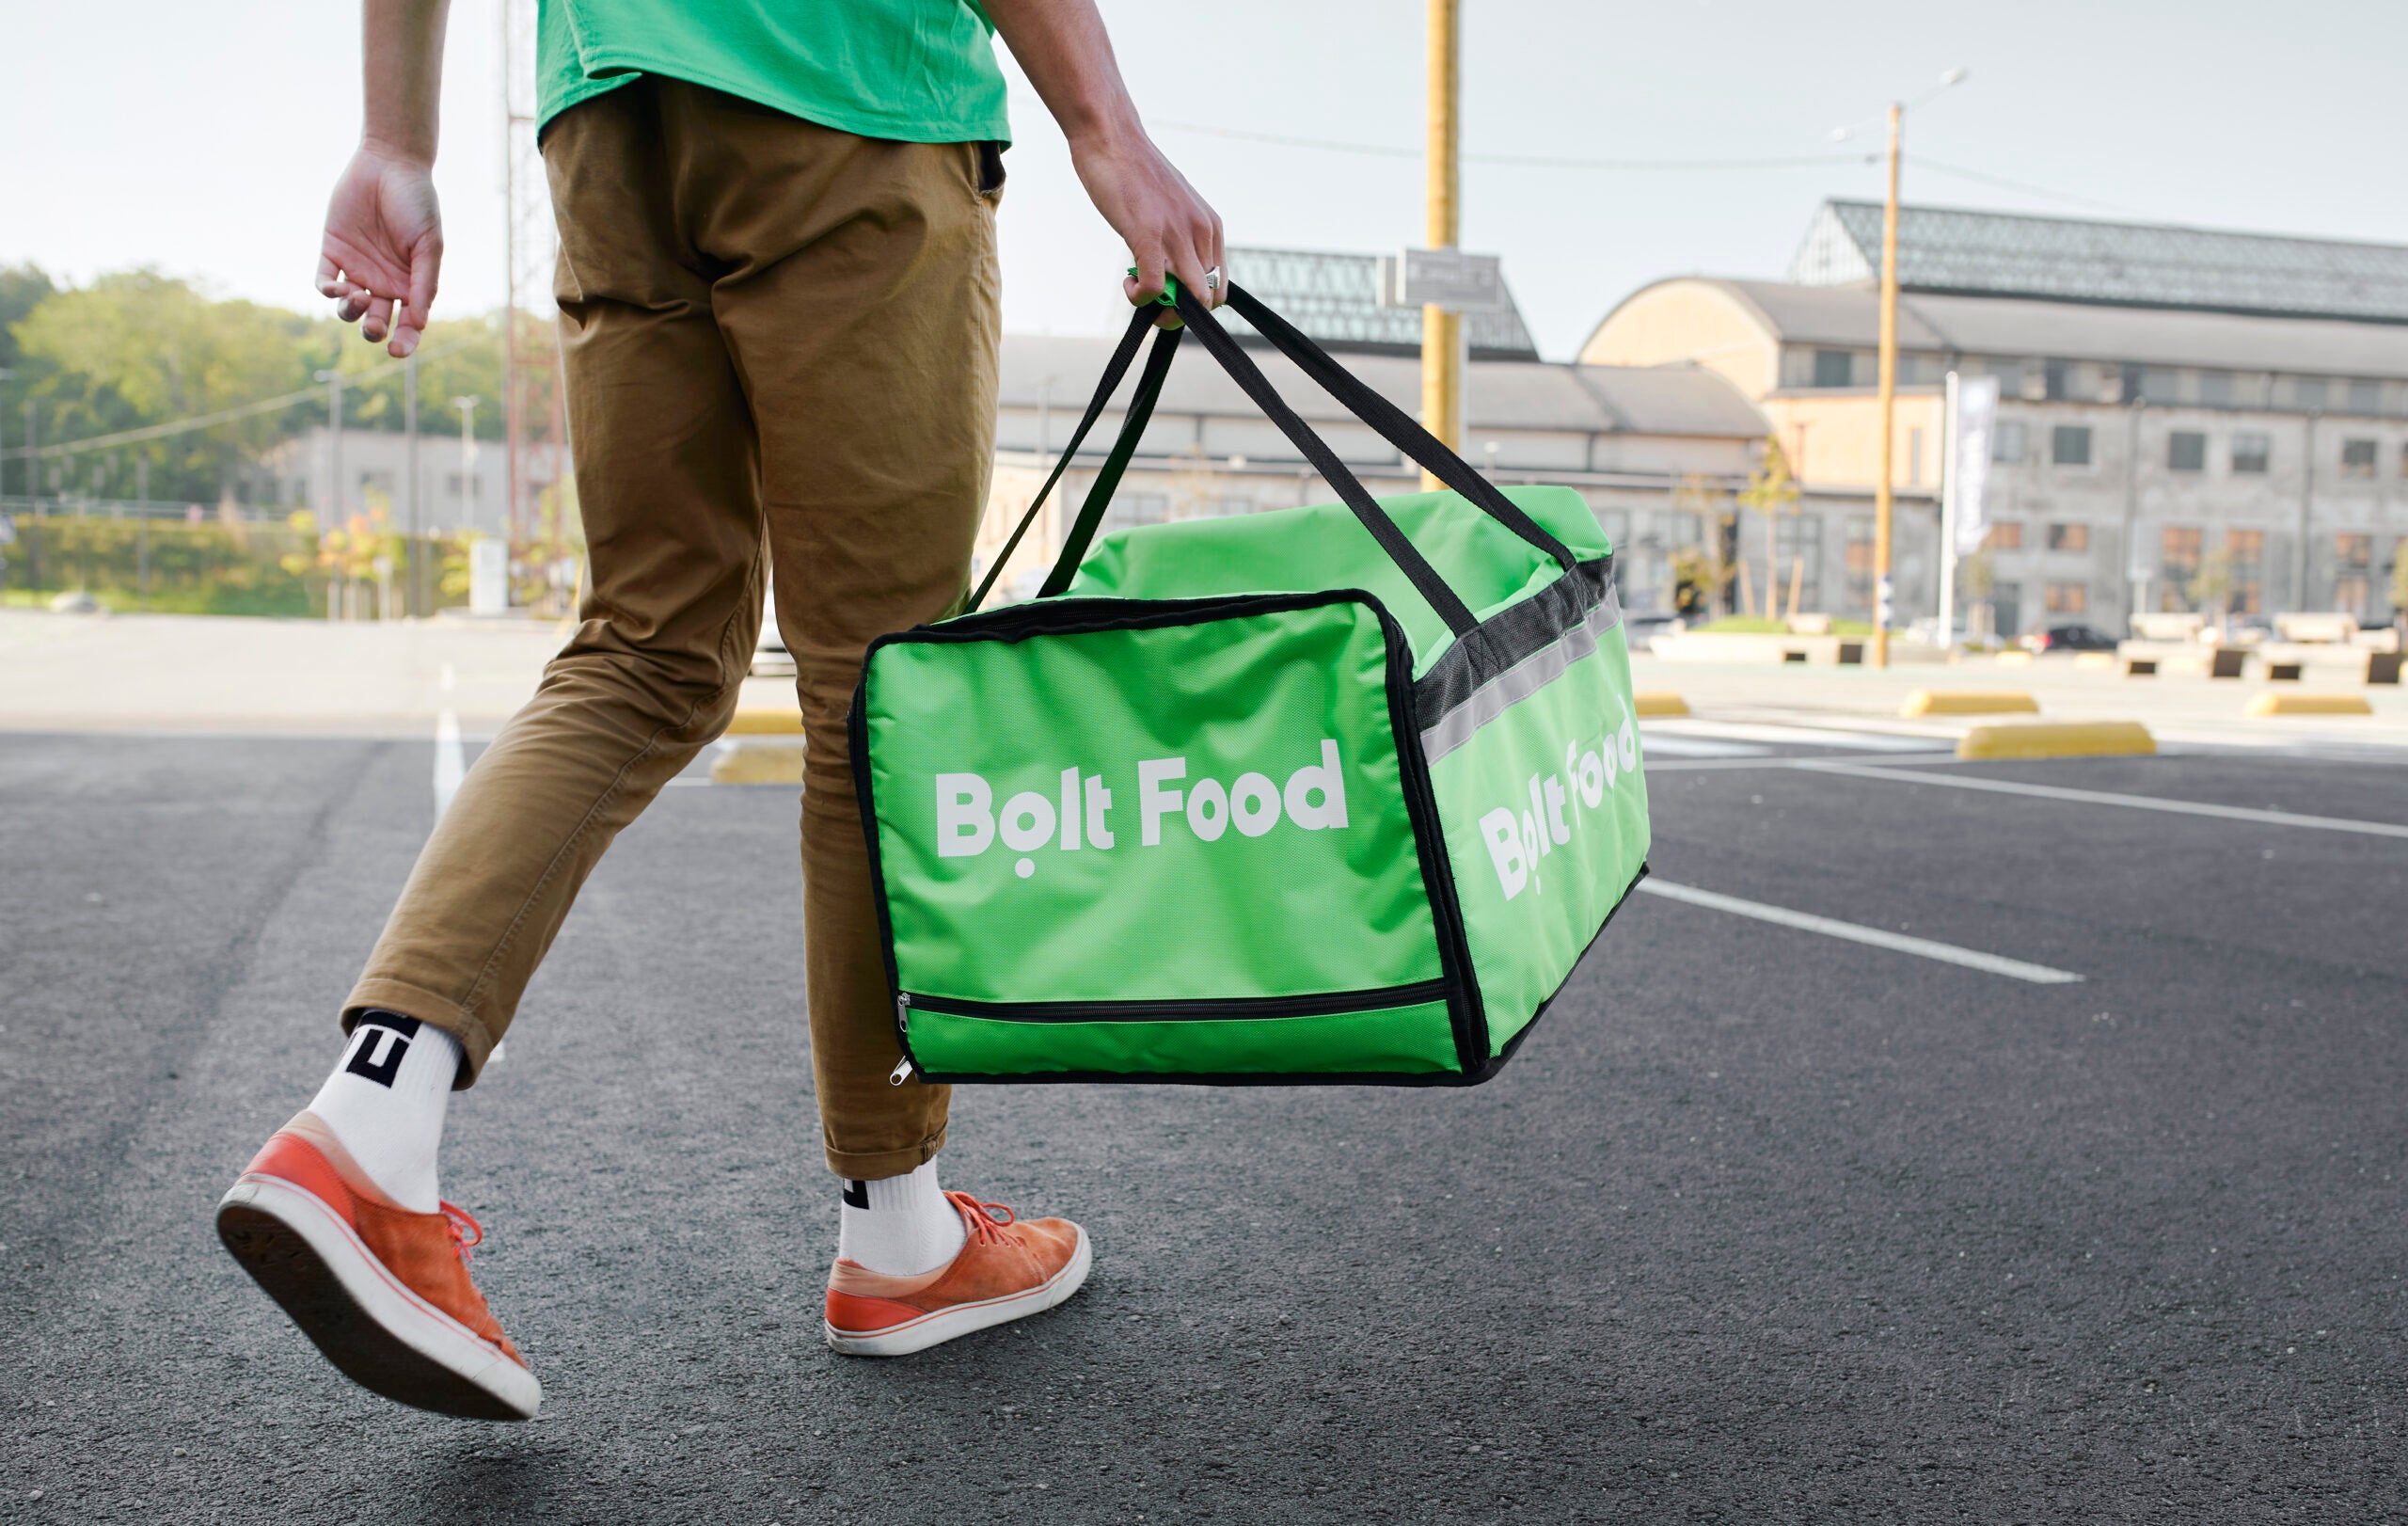 Bolt raises €600m to take on Uber and Getir in on-demand grocery market